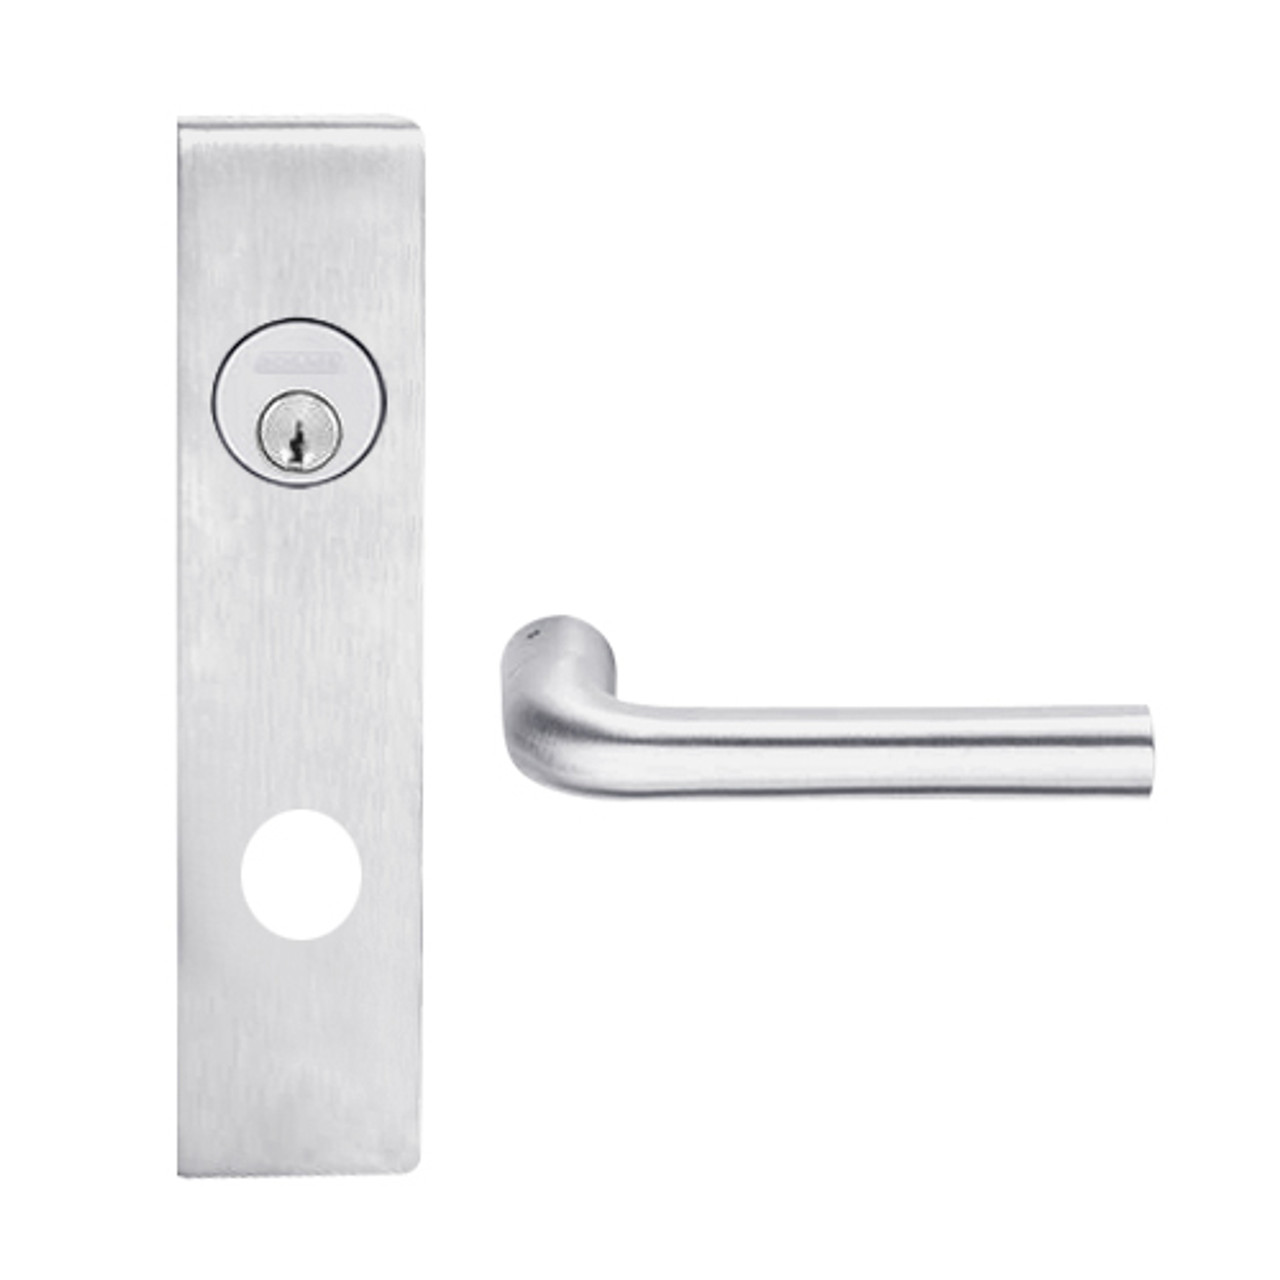 L9080L-02L-626 Schlage L Series Less Cylinder Storeroom Commercial Mortise Lock with 02 Cast Lever Design in Satin Chrome